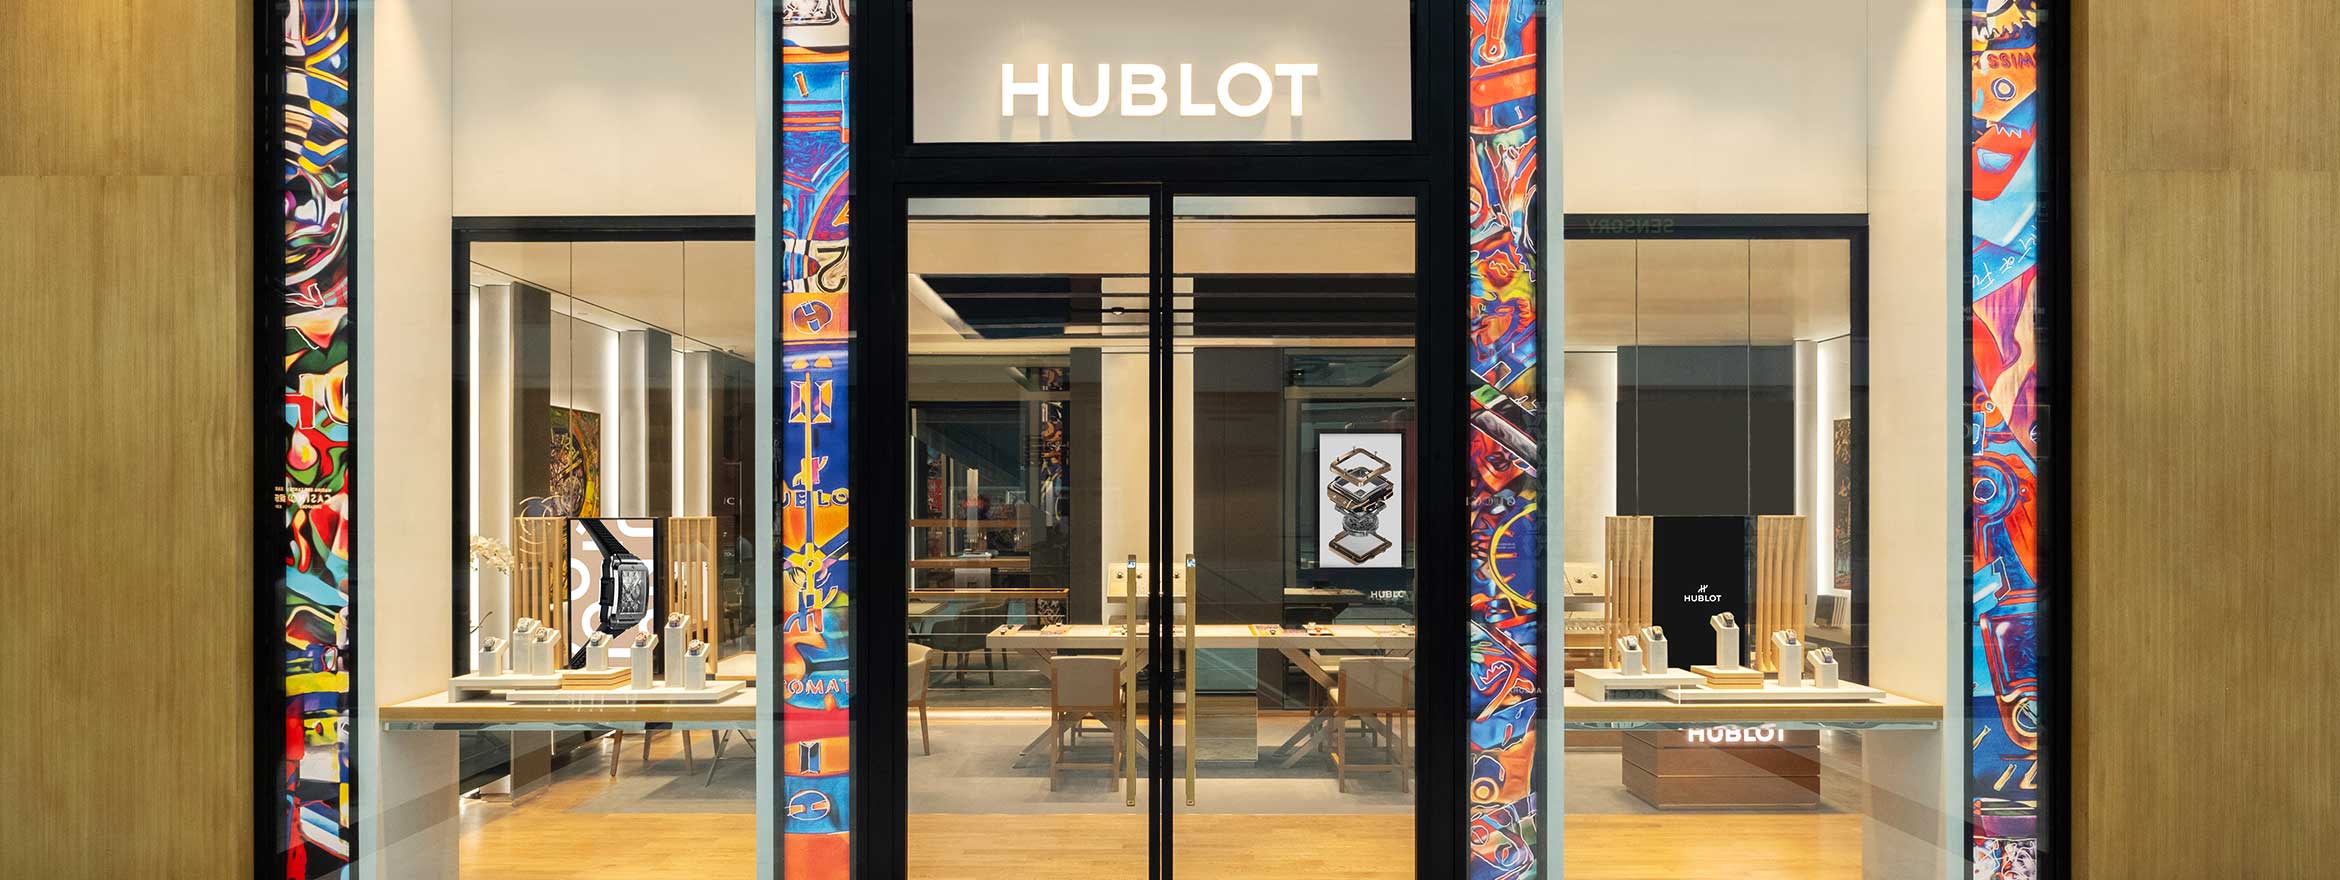 What’s new inside Hublot’s refreshed Marina Bay Sands boutique